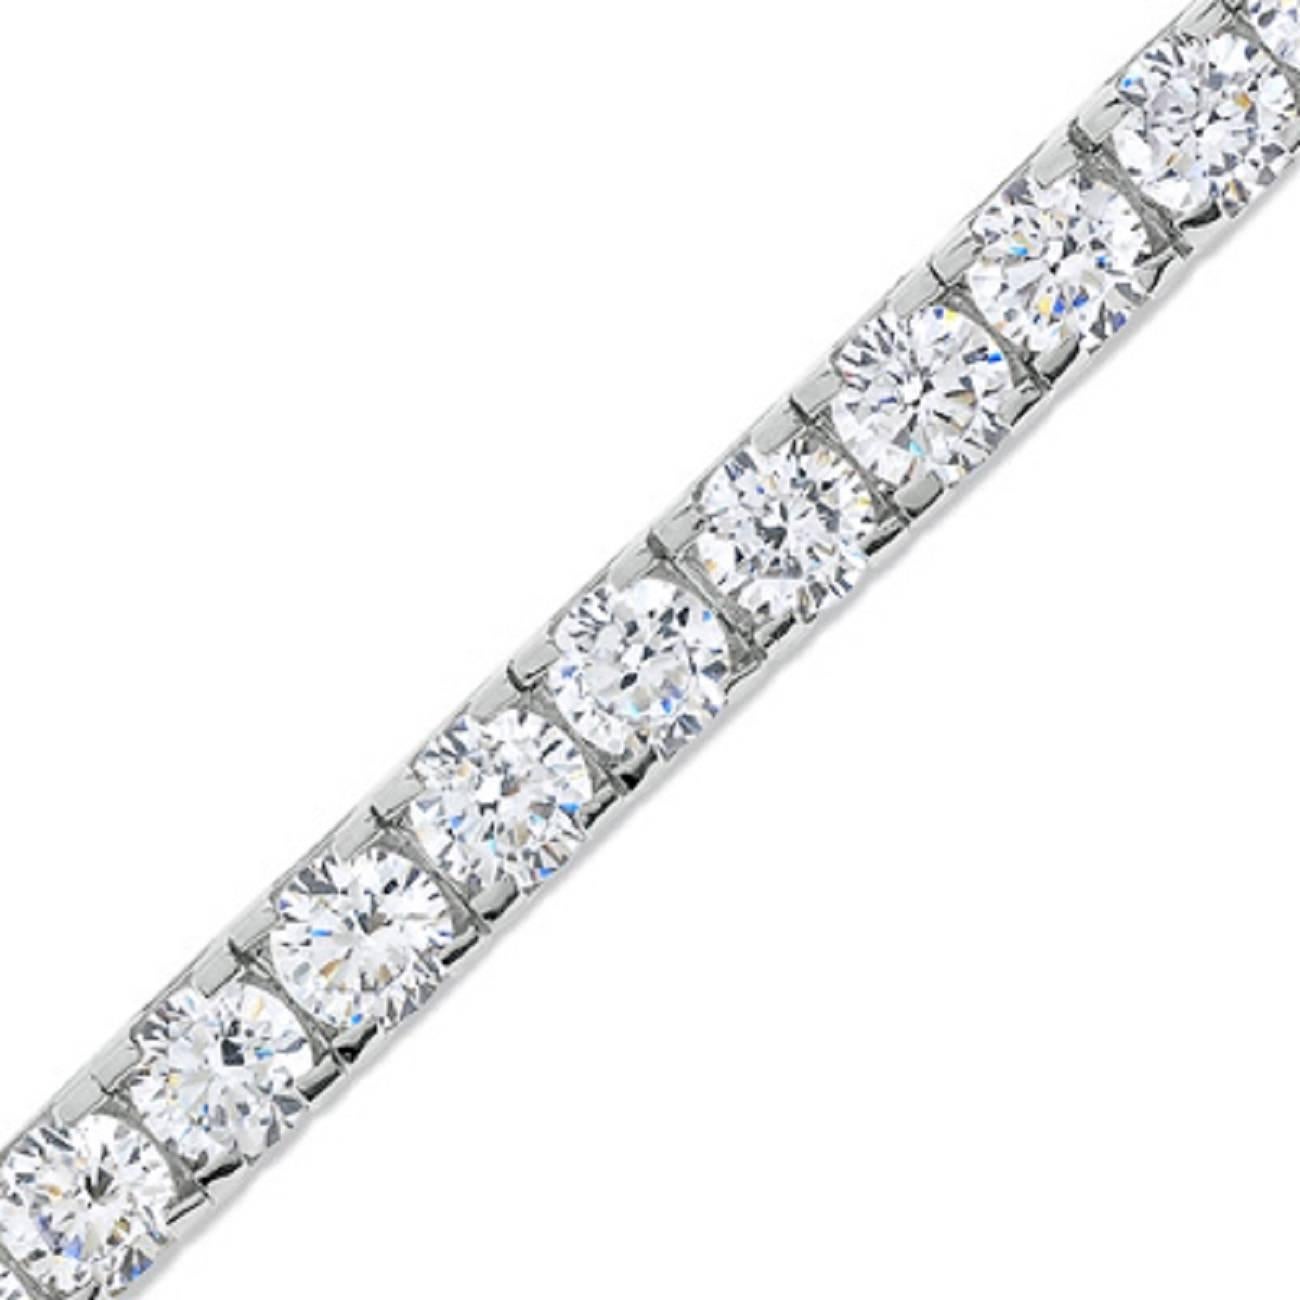 14 Karat White Gold diamond tennis bracelet featuring 45 round brilliants weighing 8 Carats.
Color G-H
Clarity SI

Can be made in 18 Karat White Gold or Yellow Gold
DM for pricing.

In stock 1-22 Carat Tennis bracelets.
